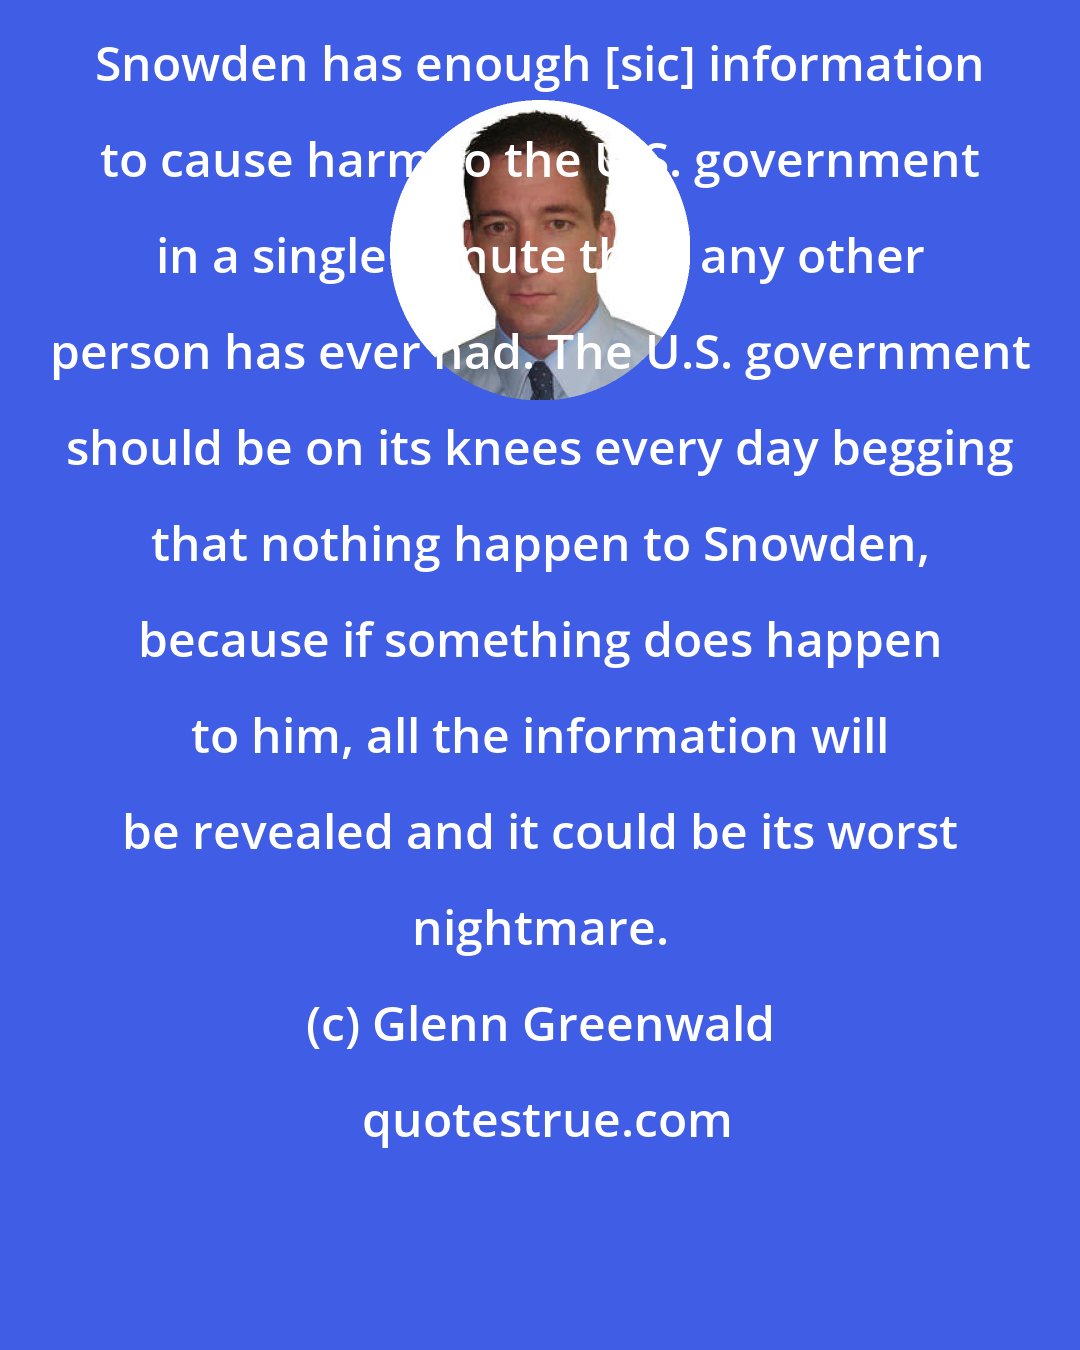 Glenn Greenwald: Snowden has enough [sic] information to cause harm to the U.S. government in a single minute than any other person has ever had. The U.S. government should be on its knees every day begging that nothing happen to Snowden, because if something does happen to him, all the information will be revealed and it could be its worst nightmare.